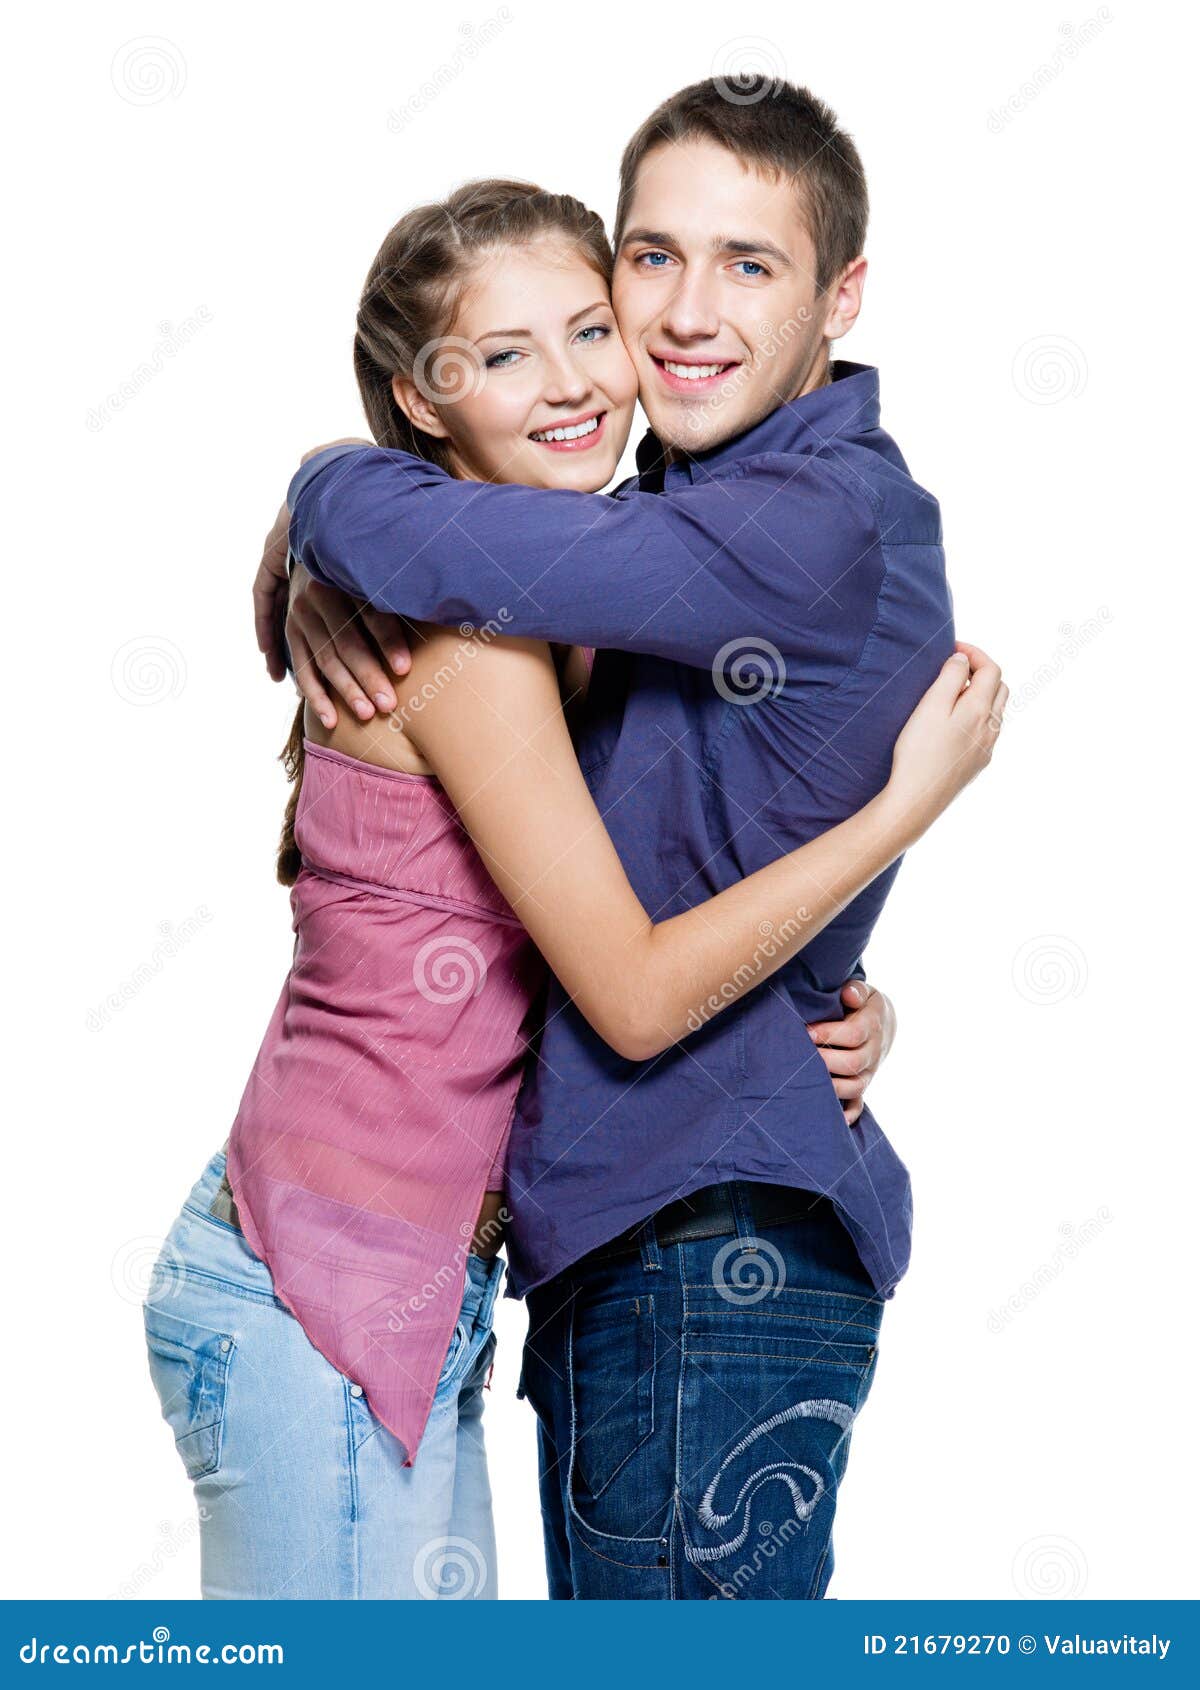 https://thumbs.dreamstime.com/z/young-happy-teen-smiling-couple-21679270.jpg